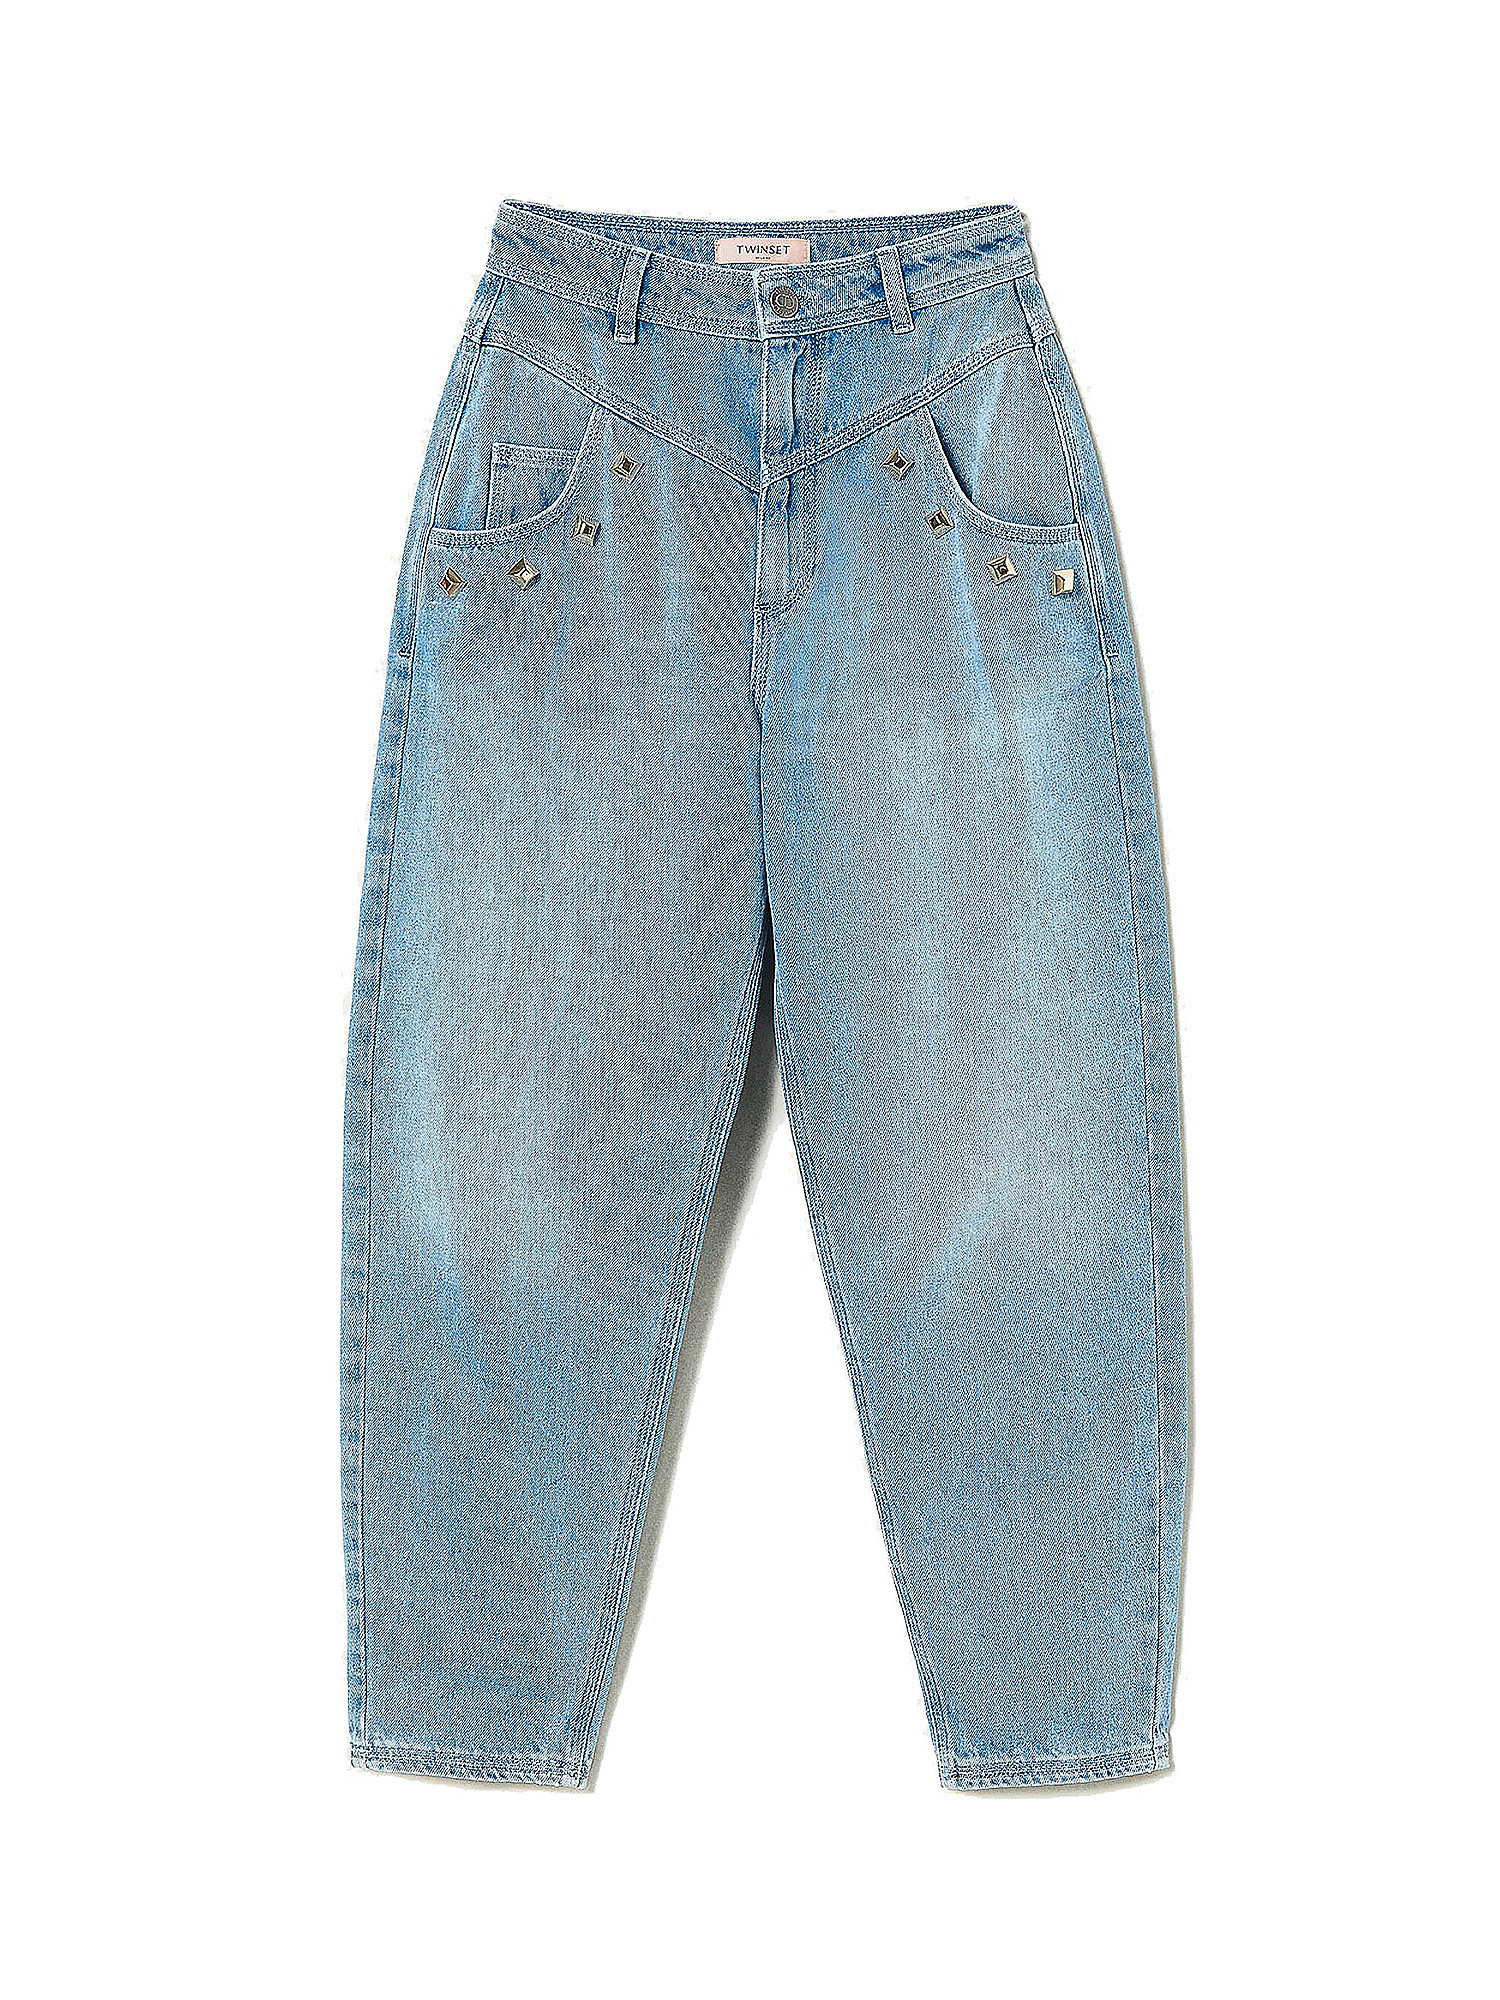 High-waisted jeans with studs, Denim, large image number 0